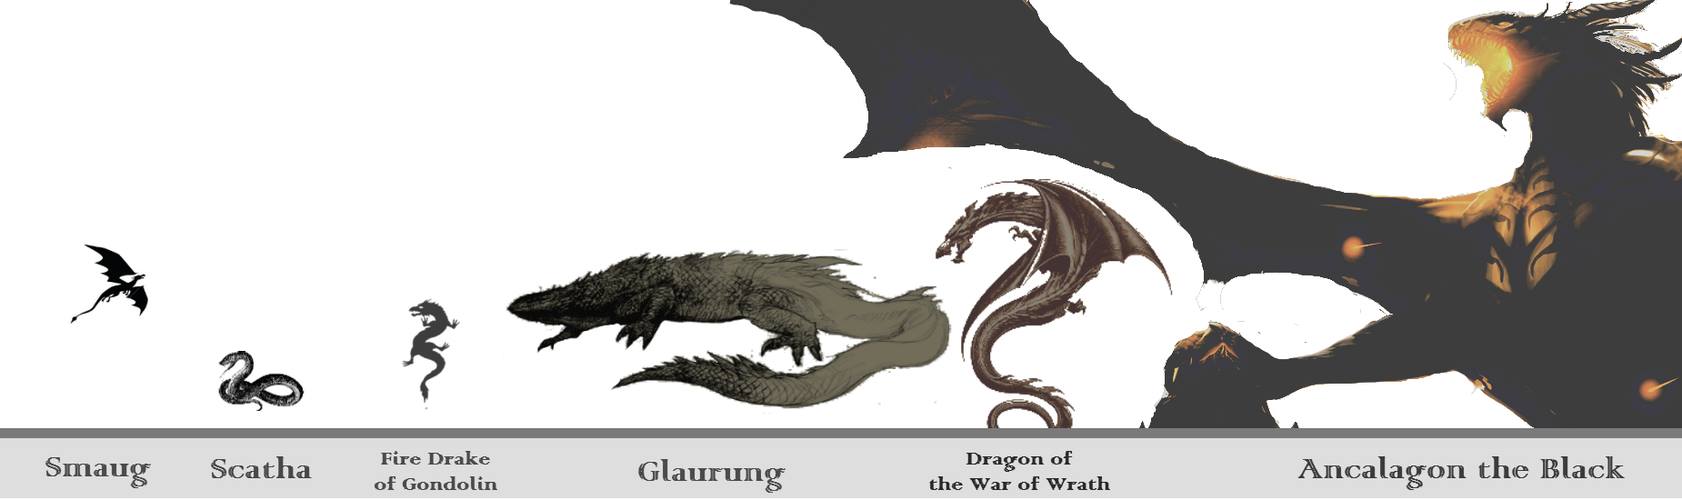 Isengard - Balrog vs Dragon: I have given that some thoughts. At the  beginning I asumed that they would be quite equal, but I found a threat in  a Tolkien forum where